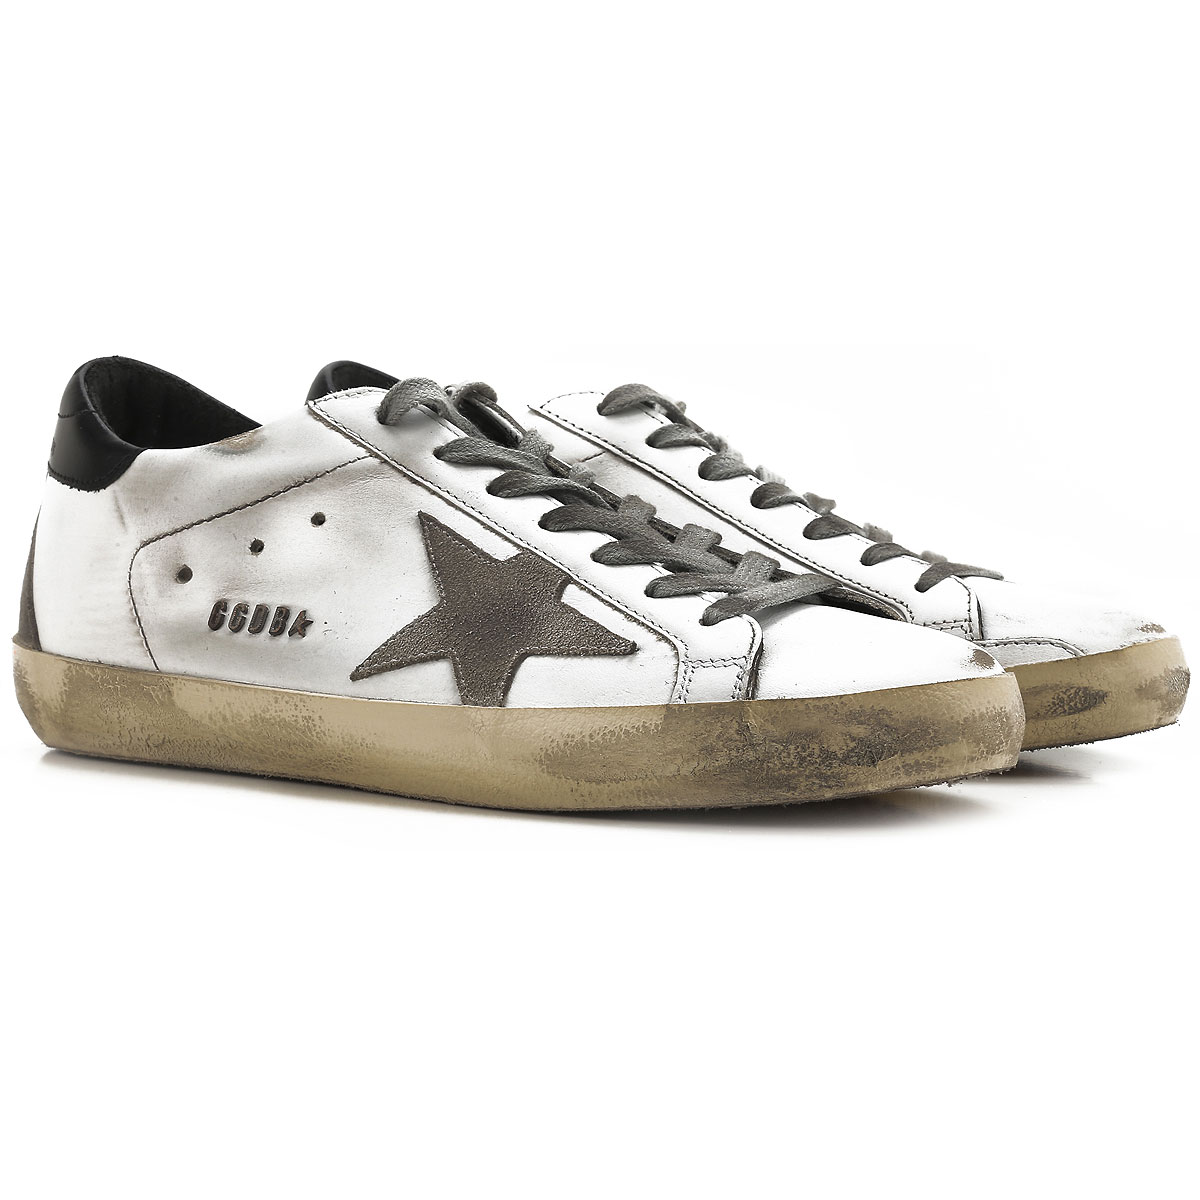 Mens Shoes Golden Goose, Style code: gc0ms590-w55-